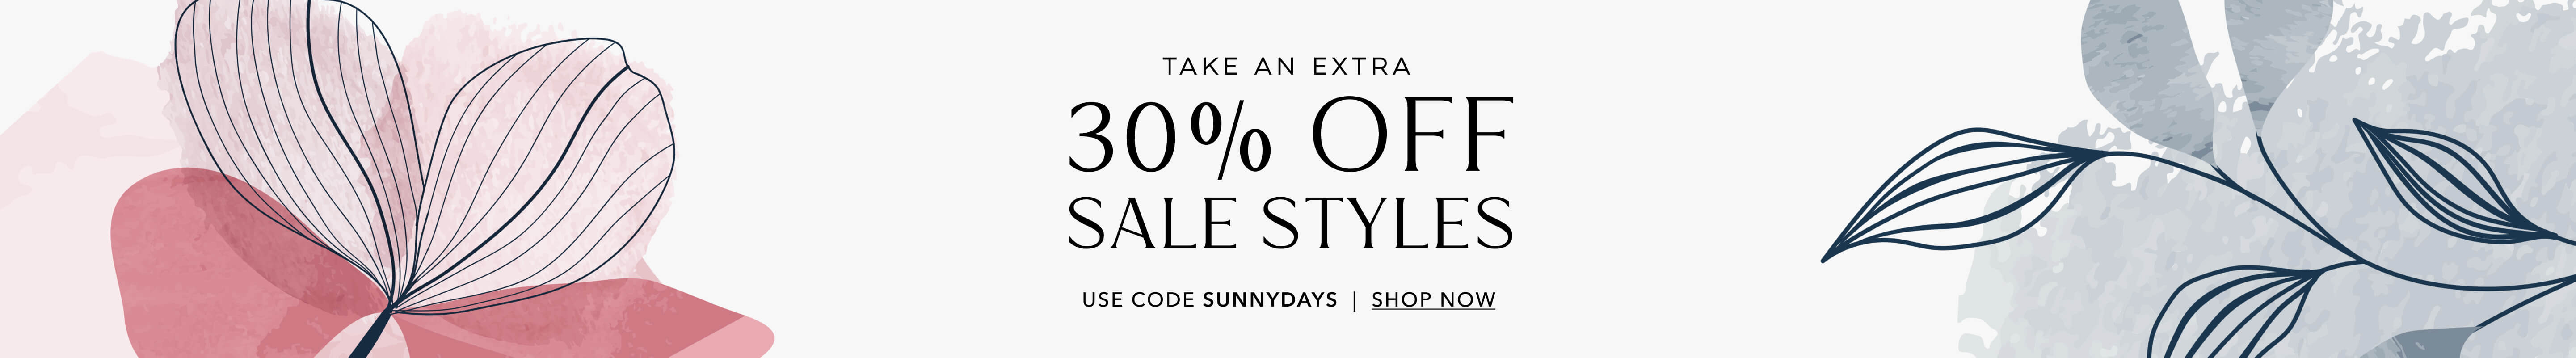 Take an Extra 30% OFF Sale Styles | USE CODE SUNNYDAYS | Shop Now